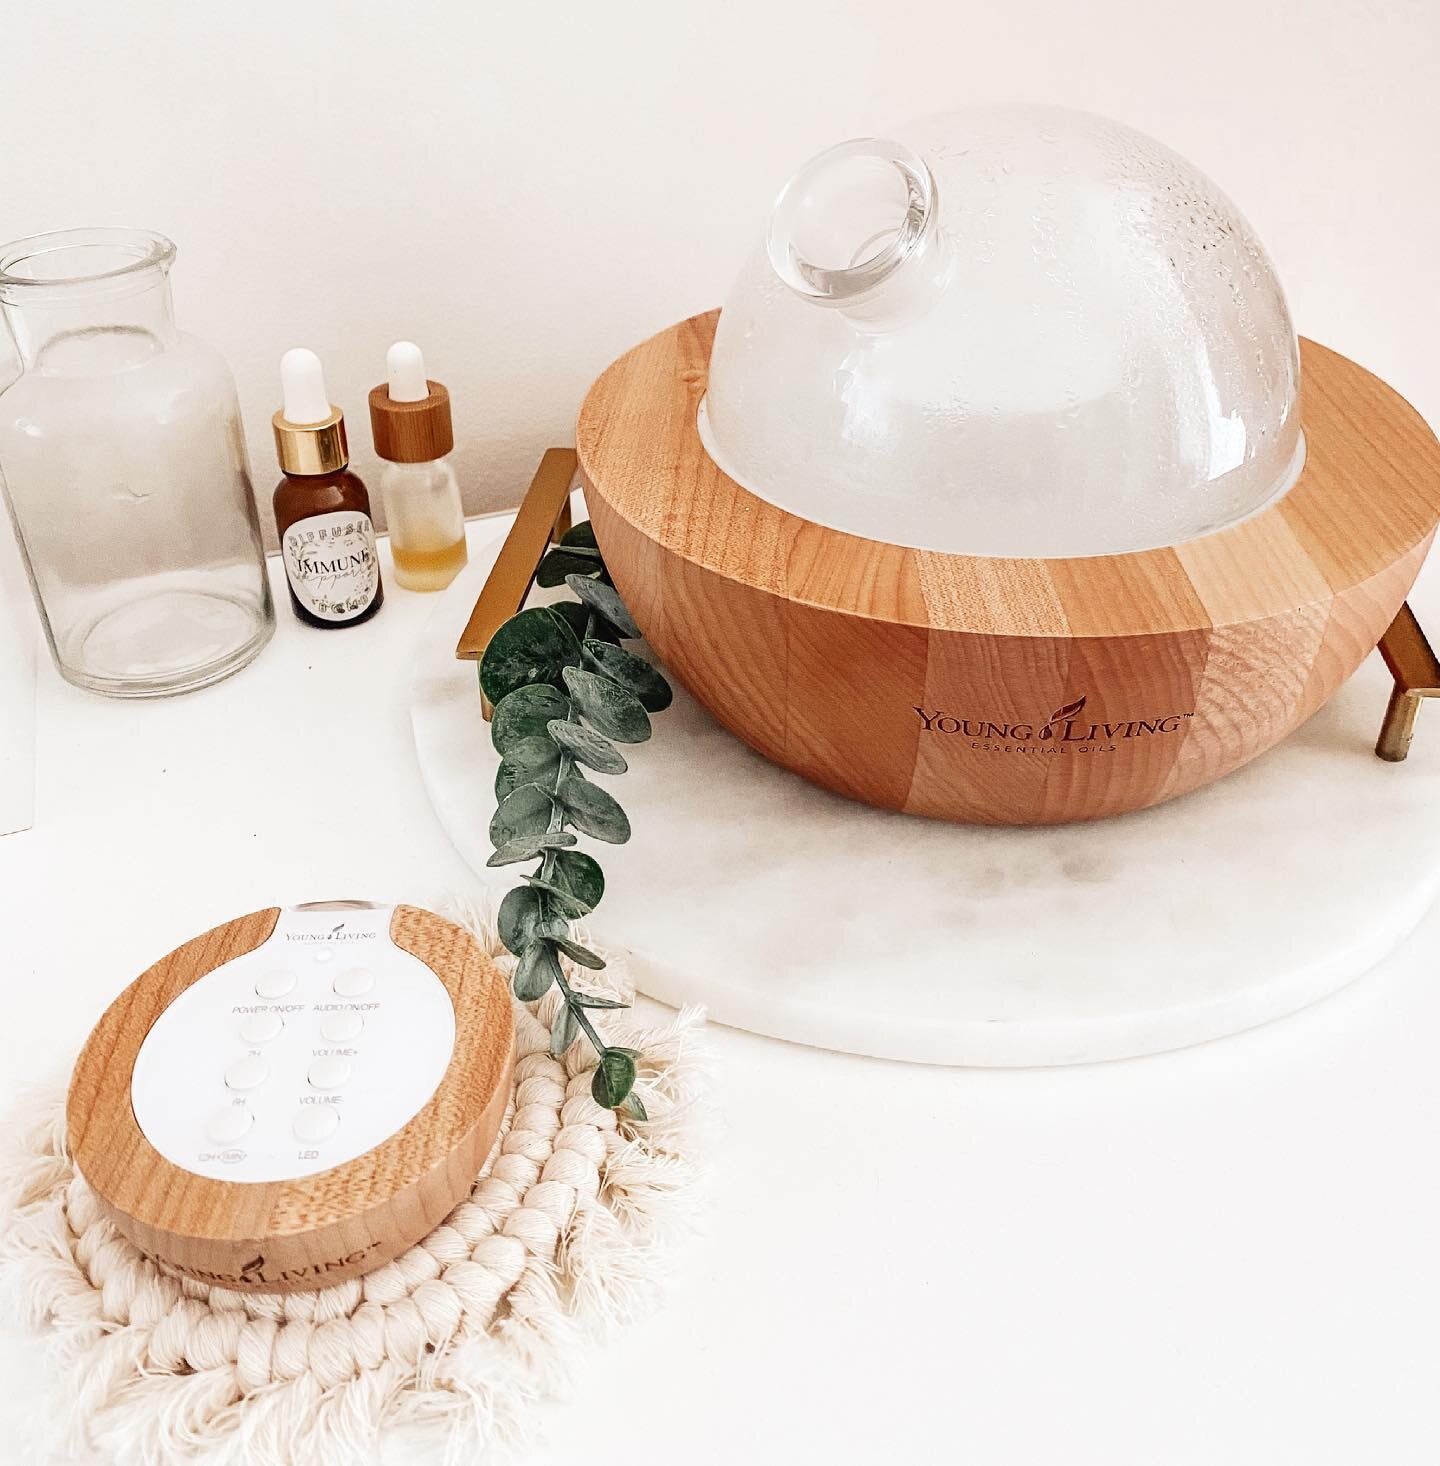 why you NEED a diffuser in your home &mdash;&mdash;

⋒ creates a spa like atmosphere 
⋒ sets the mood // viiibe of a space 
⋒ ultrasonic frequency waves create a steady stream of oils 
⋒ humidifies the air 
⋒ replaces toxins in the home 
⋒ eliminates